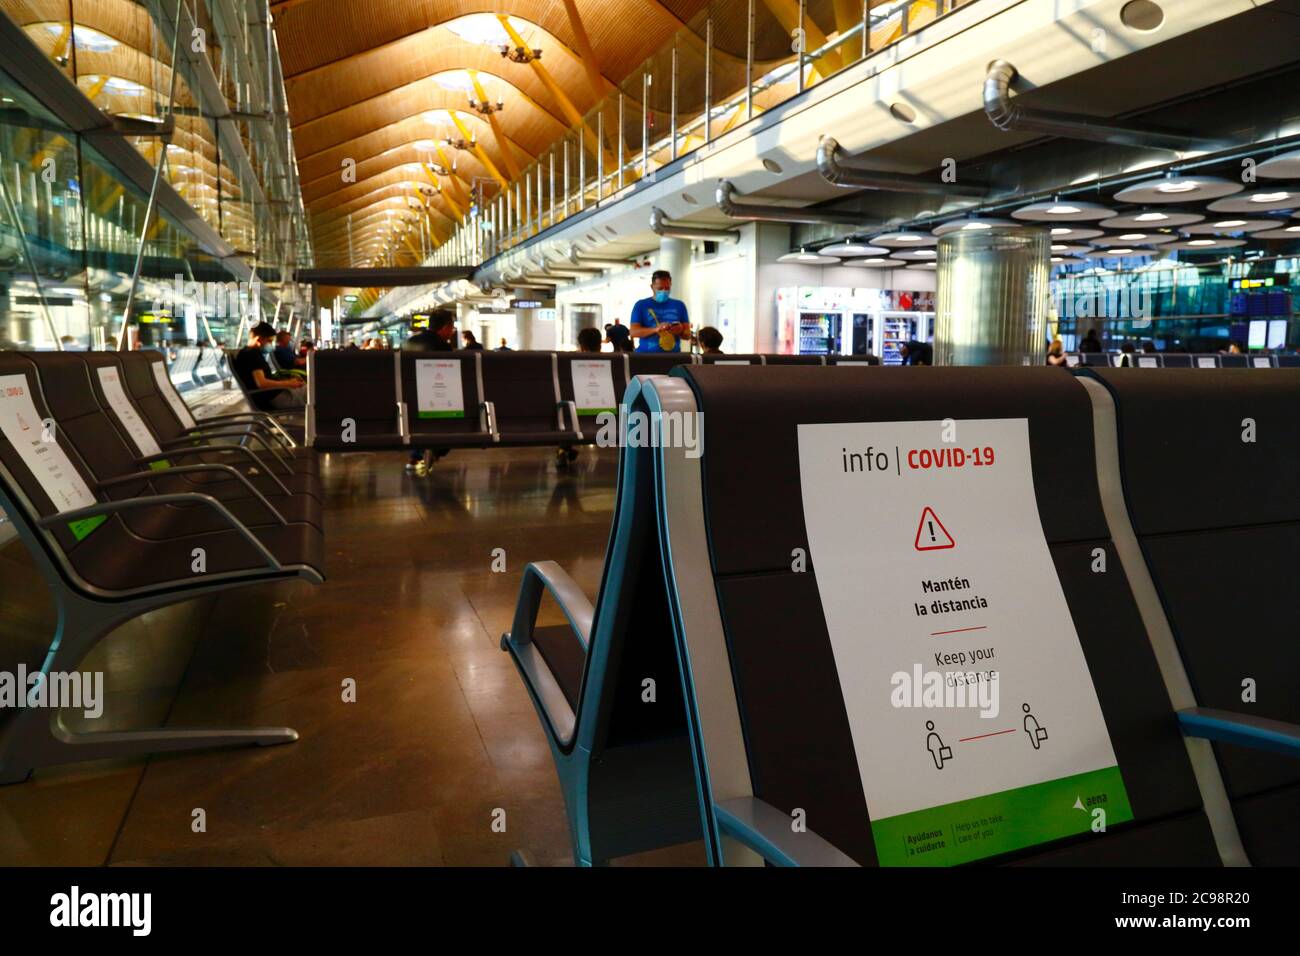 28th July 2020, Barajas Airport, Madrid, Spain: Signs on seats to help passengers comply with social distancing in the near empy departure lounge area of the Terminal 4S building of Barajas Airport. Reduced numbers of flights are now operating between European countries after the lockdown to control the covid-19 coronavirus, and governments have put a system of air bridges in place to facilitate travel and tourism. Spain has seen a number of new outbreaks in recent days, prompting the UK government to announce that people returning to the UK from Spain should quarantine for 14 days on arrival. Stock Photo